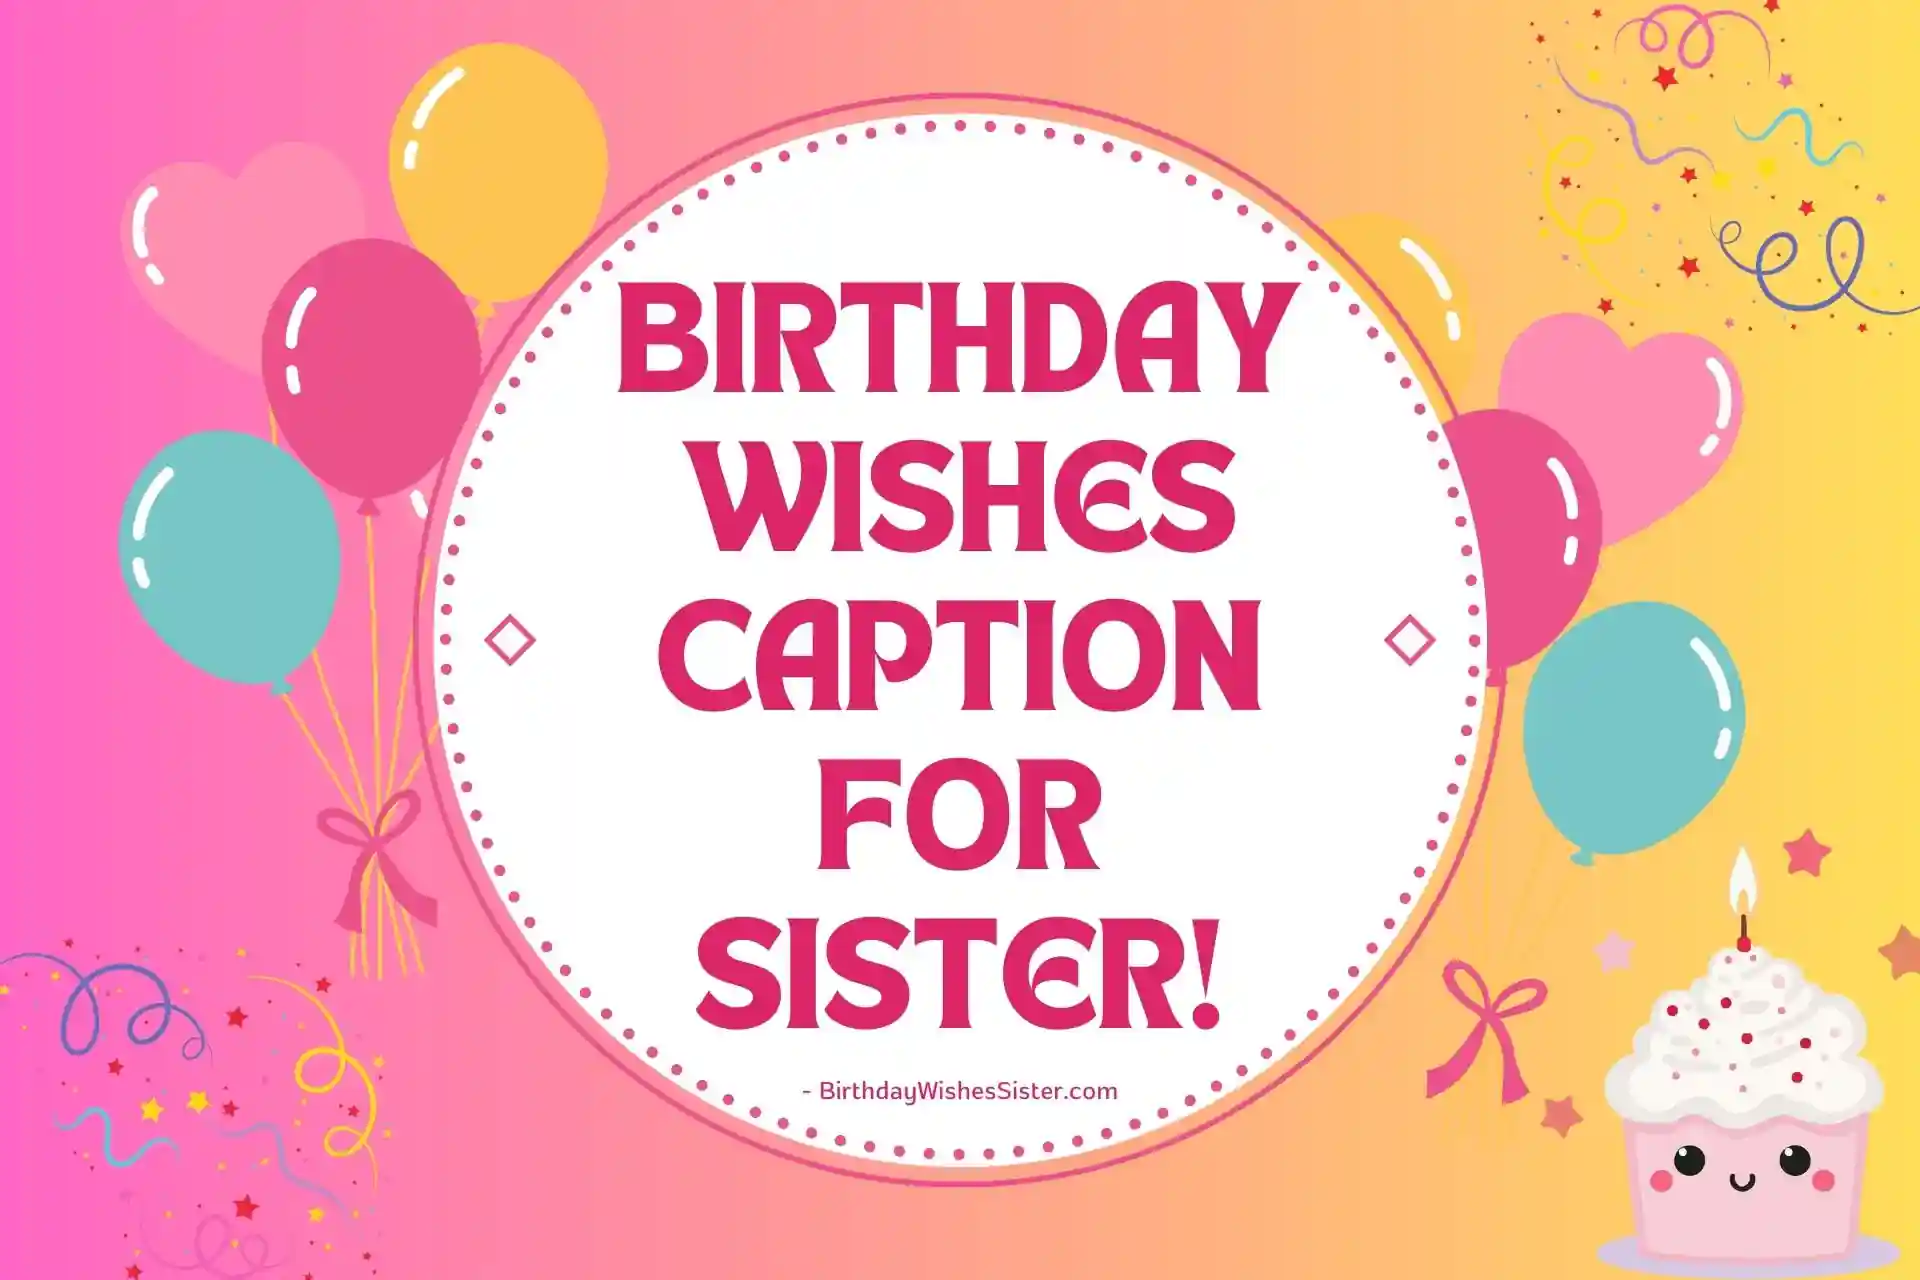 Birthday Wishes Caption For Sister, Birthday Caption For Sister